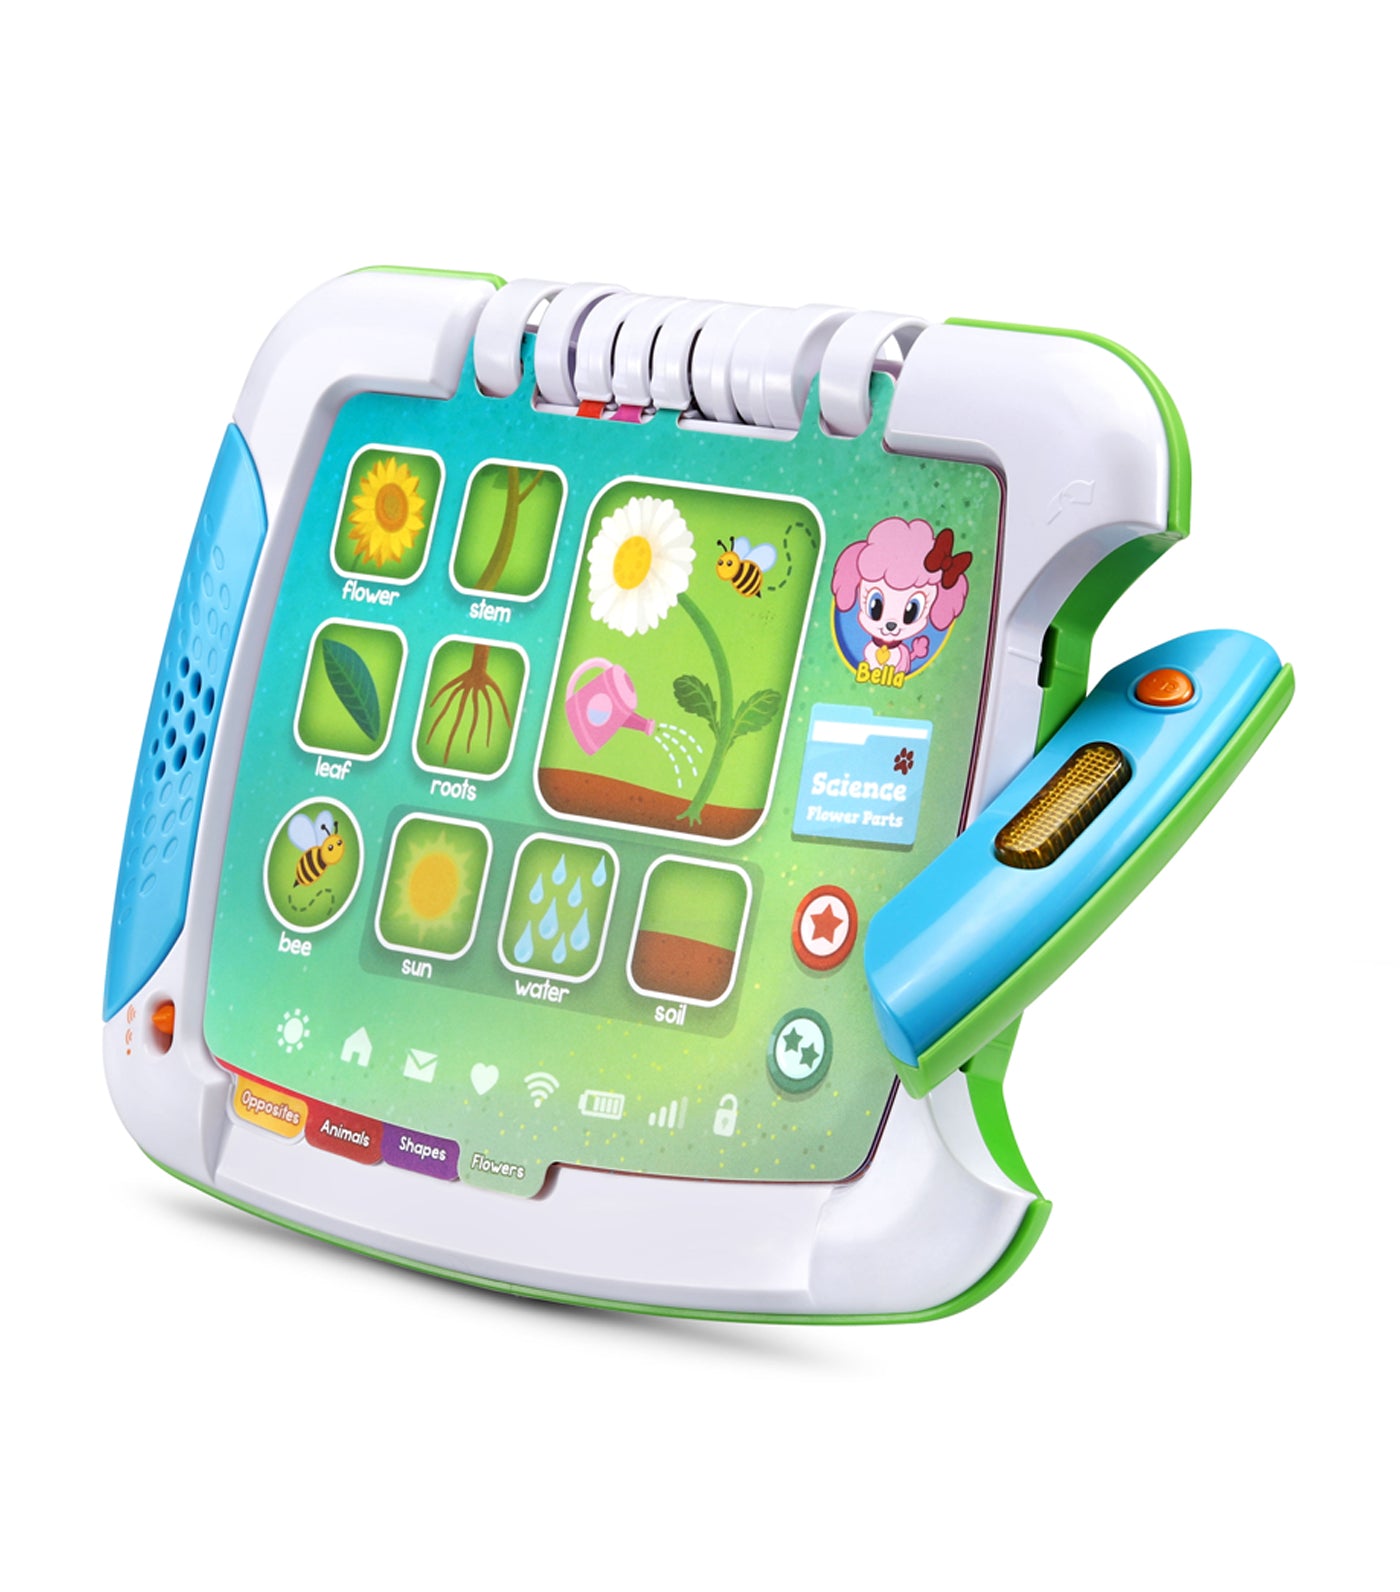 leapfrog 2-in-1 touch & learn tablet